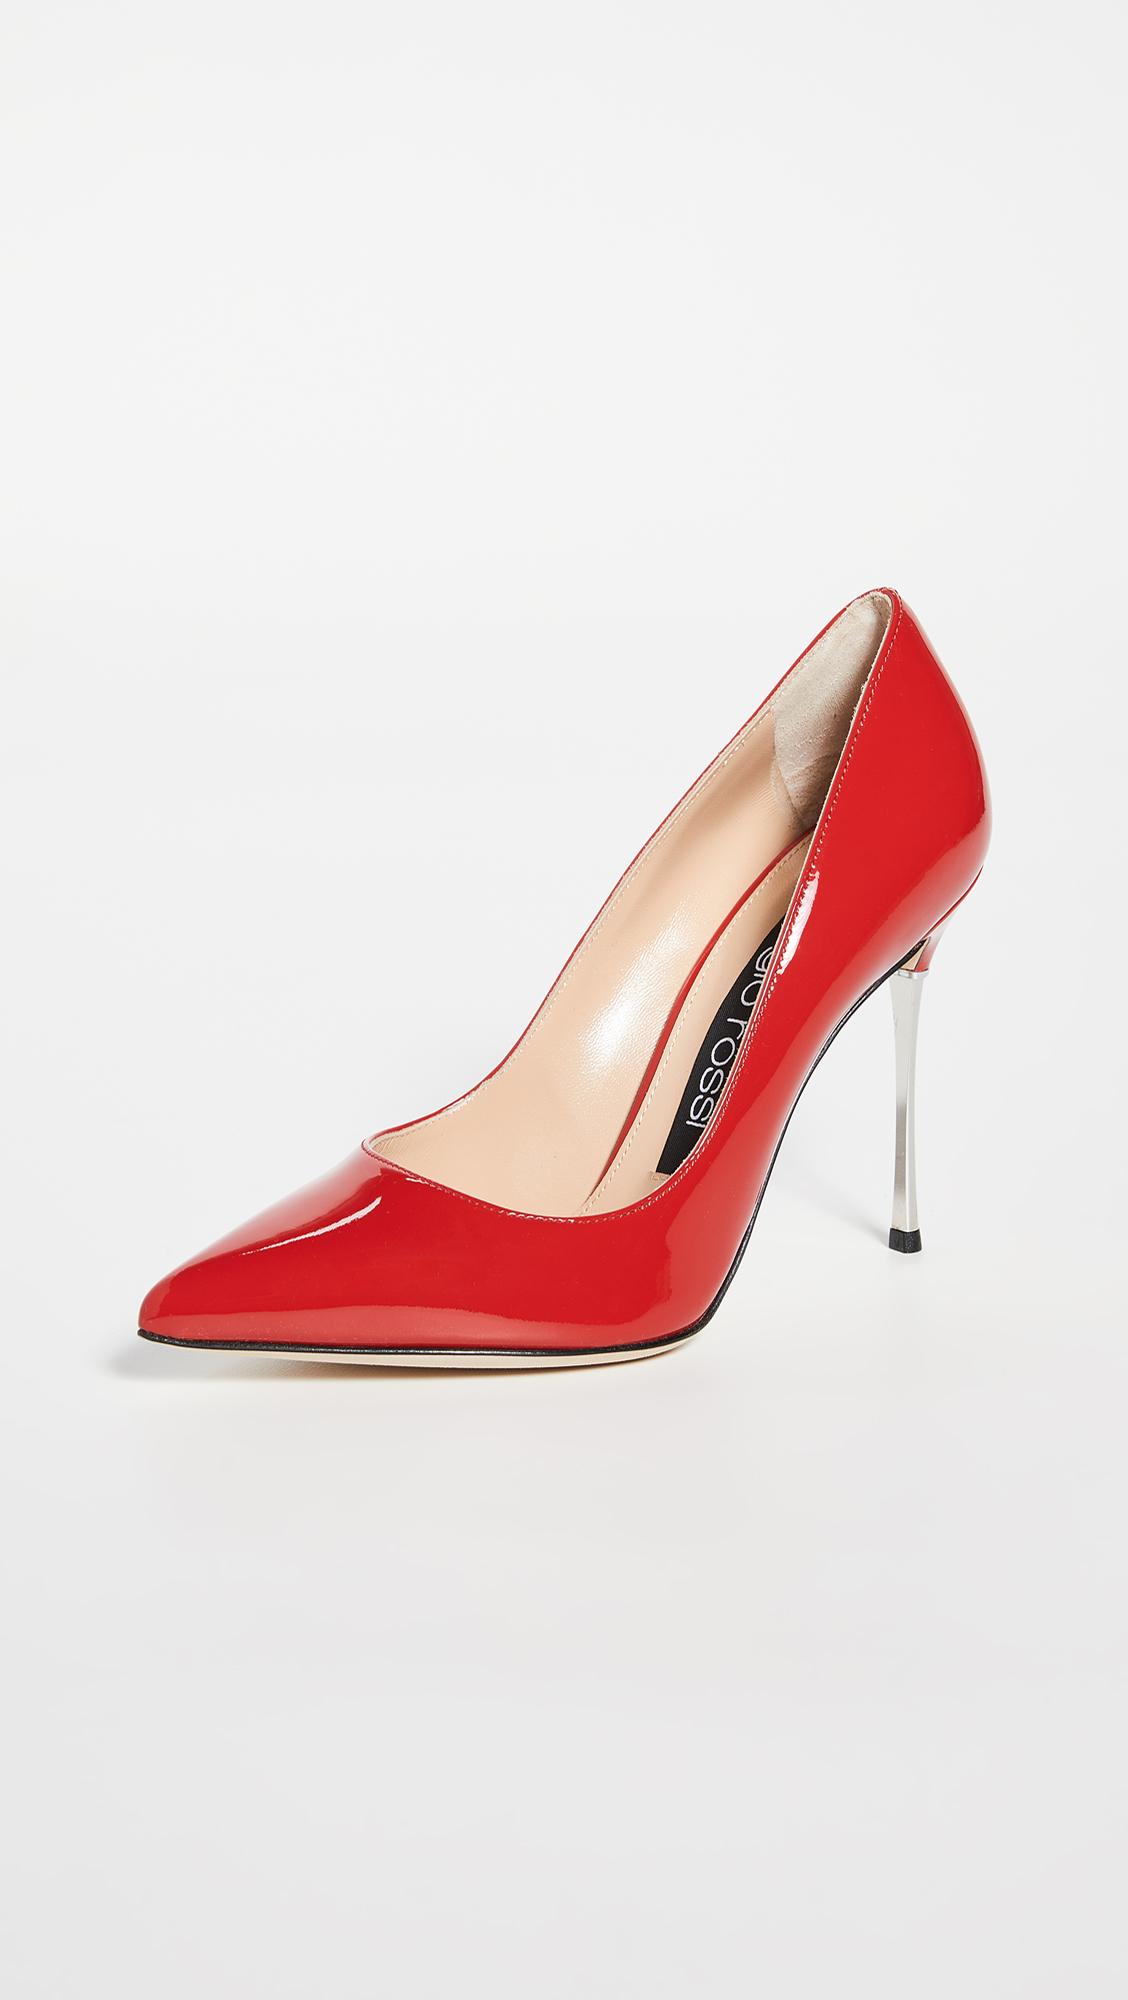 Sergio Rossi Leather Godiva Steel Pumps in Red - Save 40% - Lyst